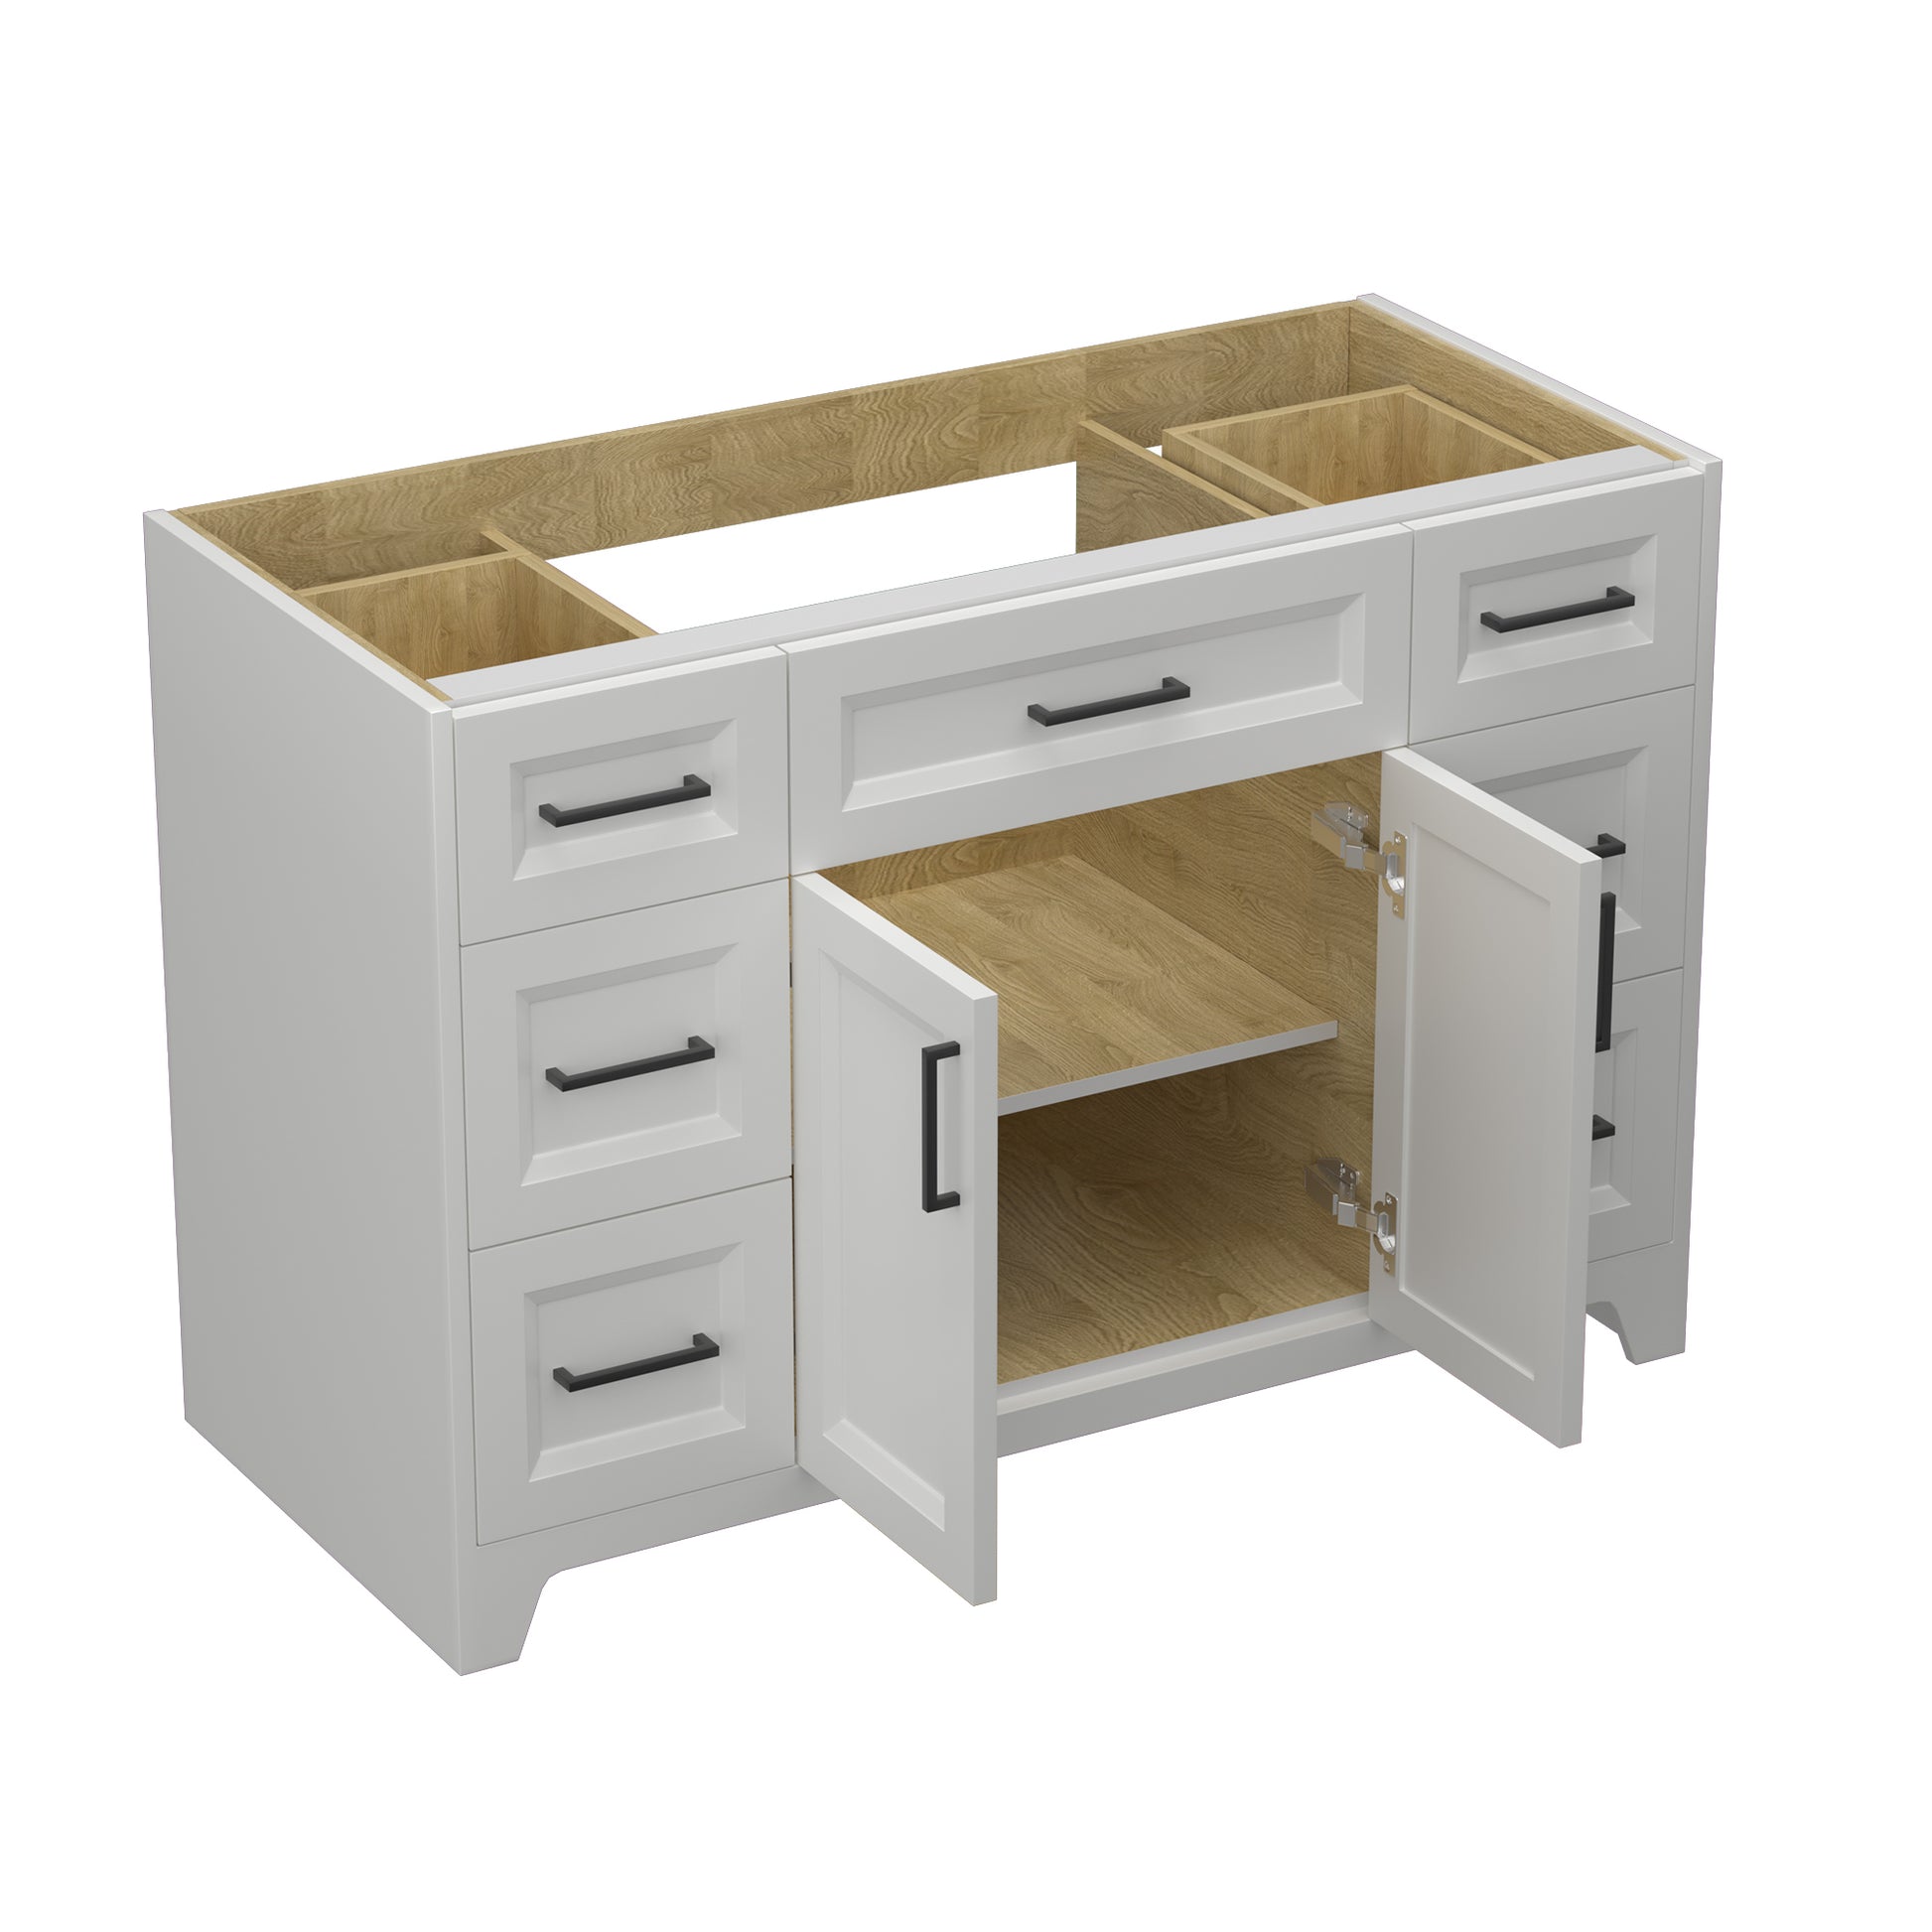 Solid Wood 48 Inch Bathroom Vanity Without Top